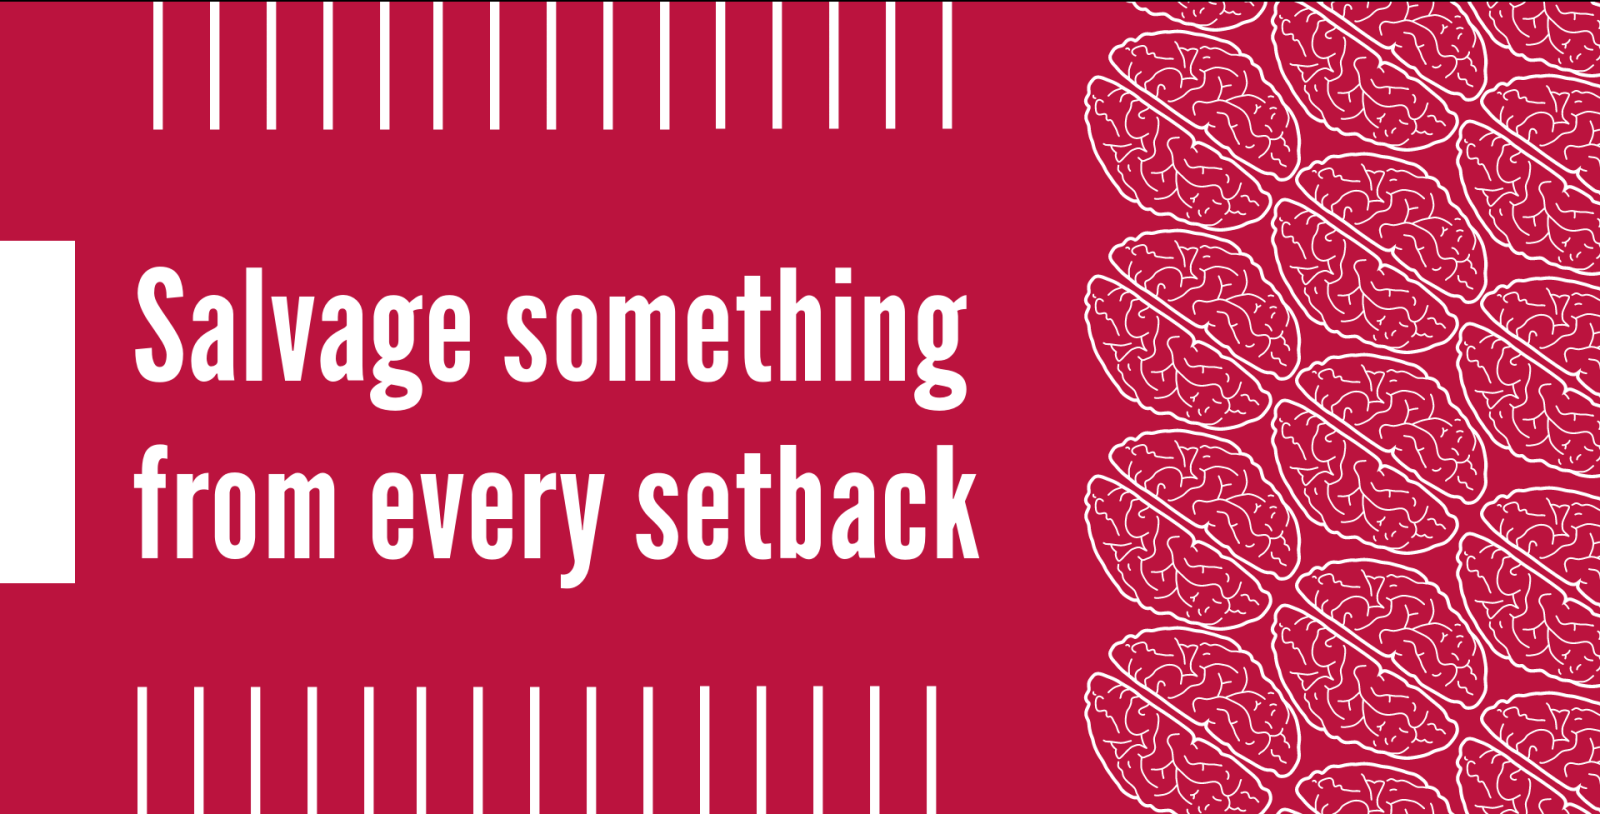 Salvage something from every setback